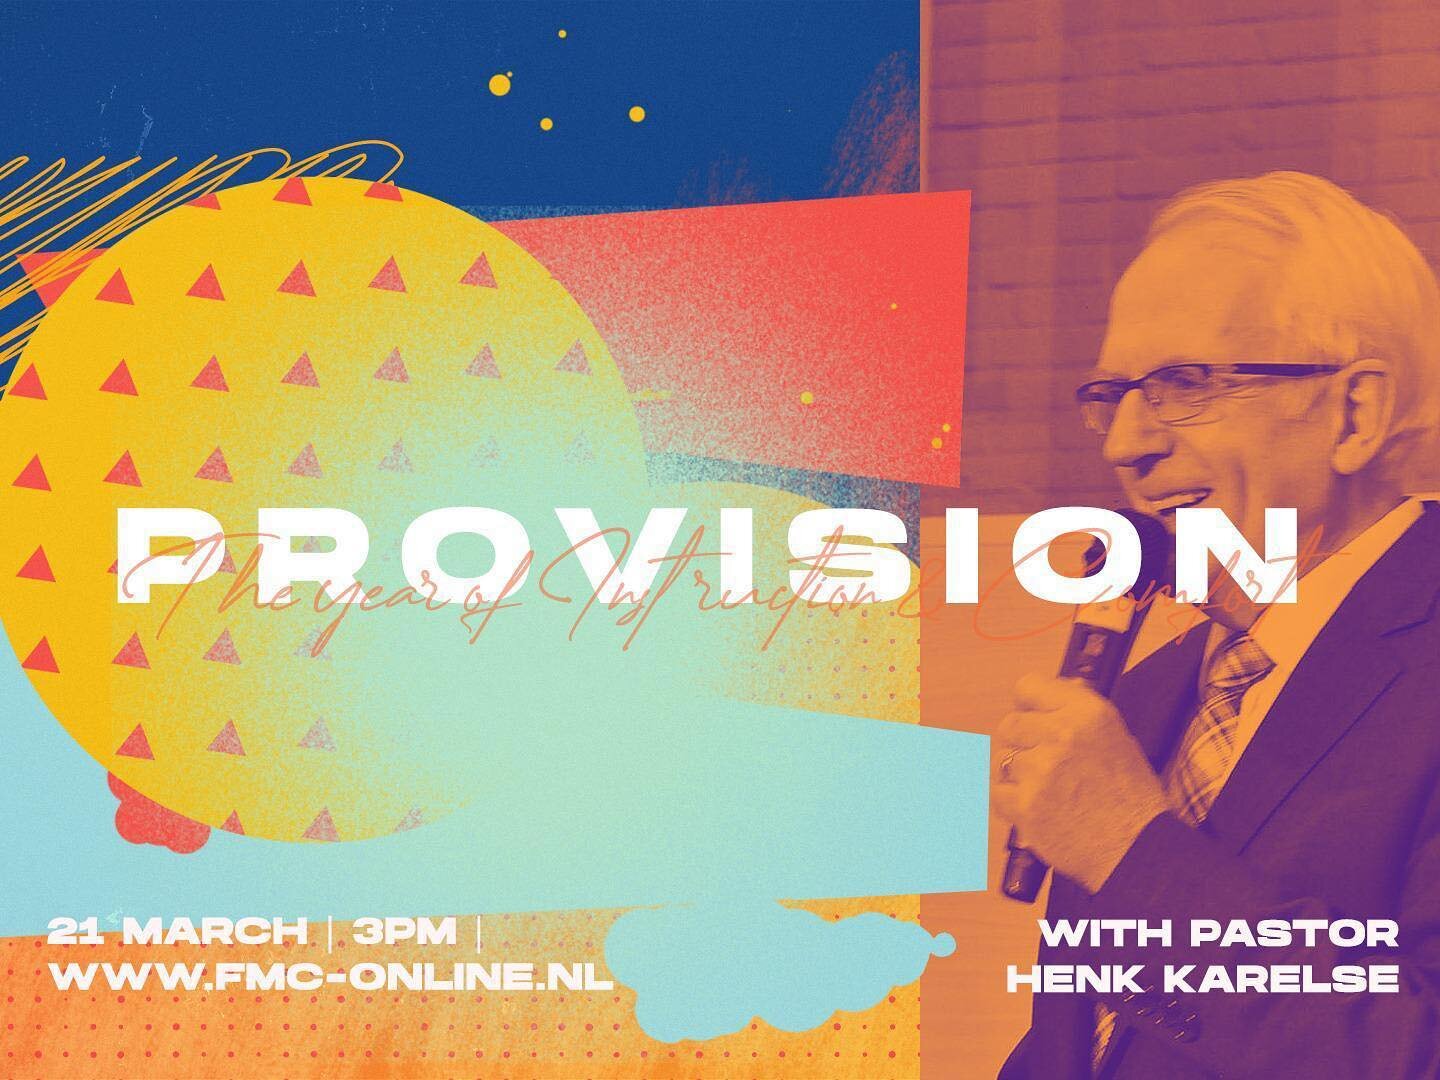 JOIN US TODAY!
Tune in at 3pm today for a very special CELEBRATION with Ps. Henk Karelse from De Banier, Almelo 🔥
Let us rejoice today 🎉
&mdash;
Link in bio